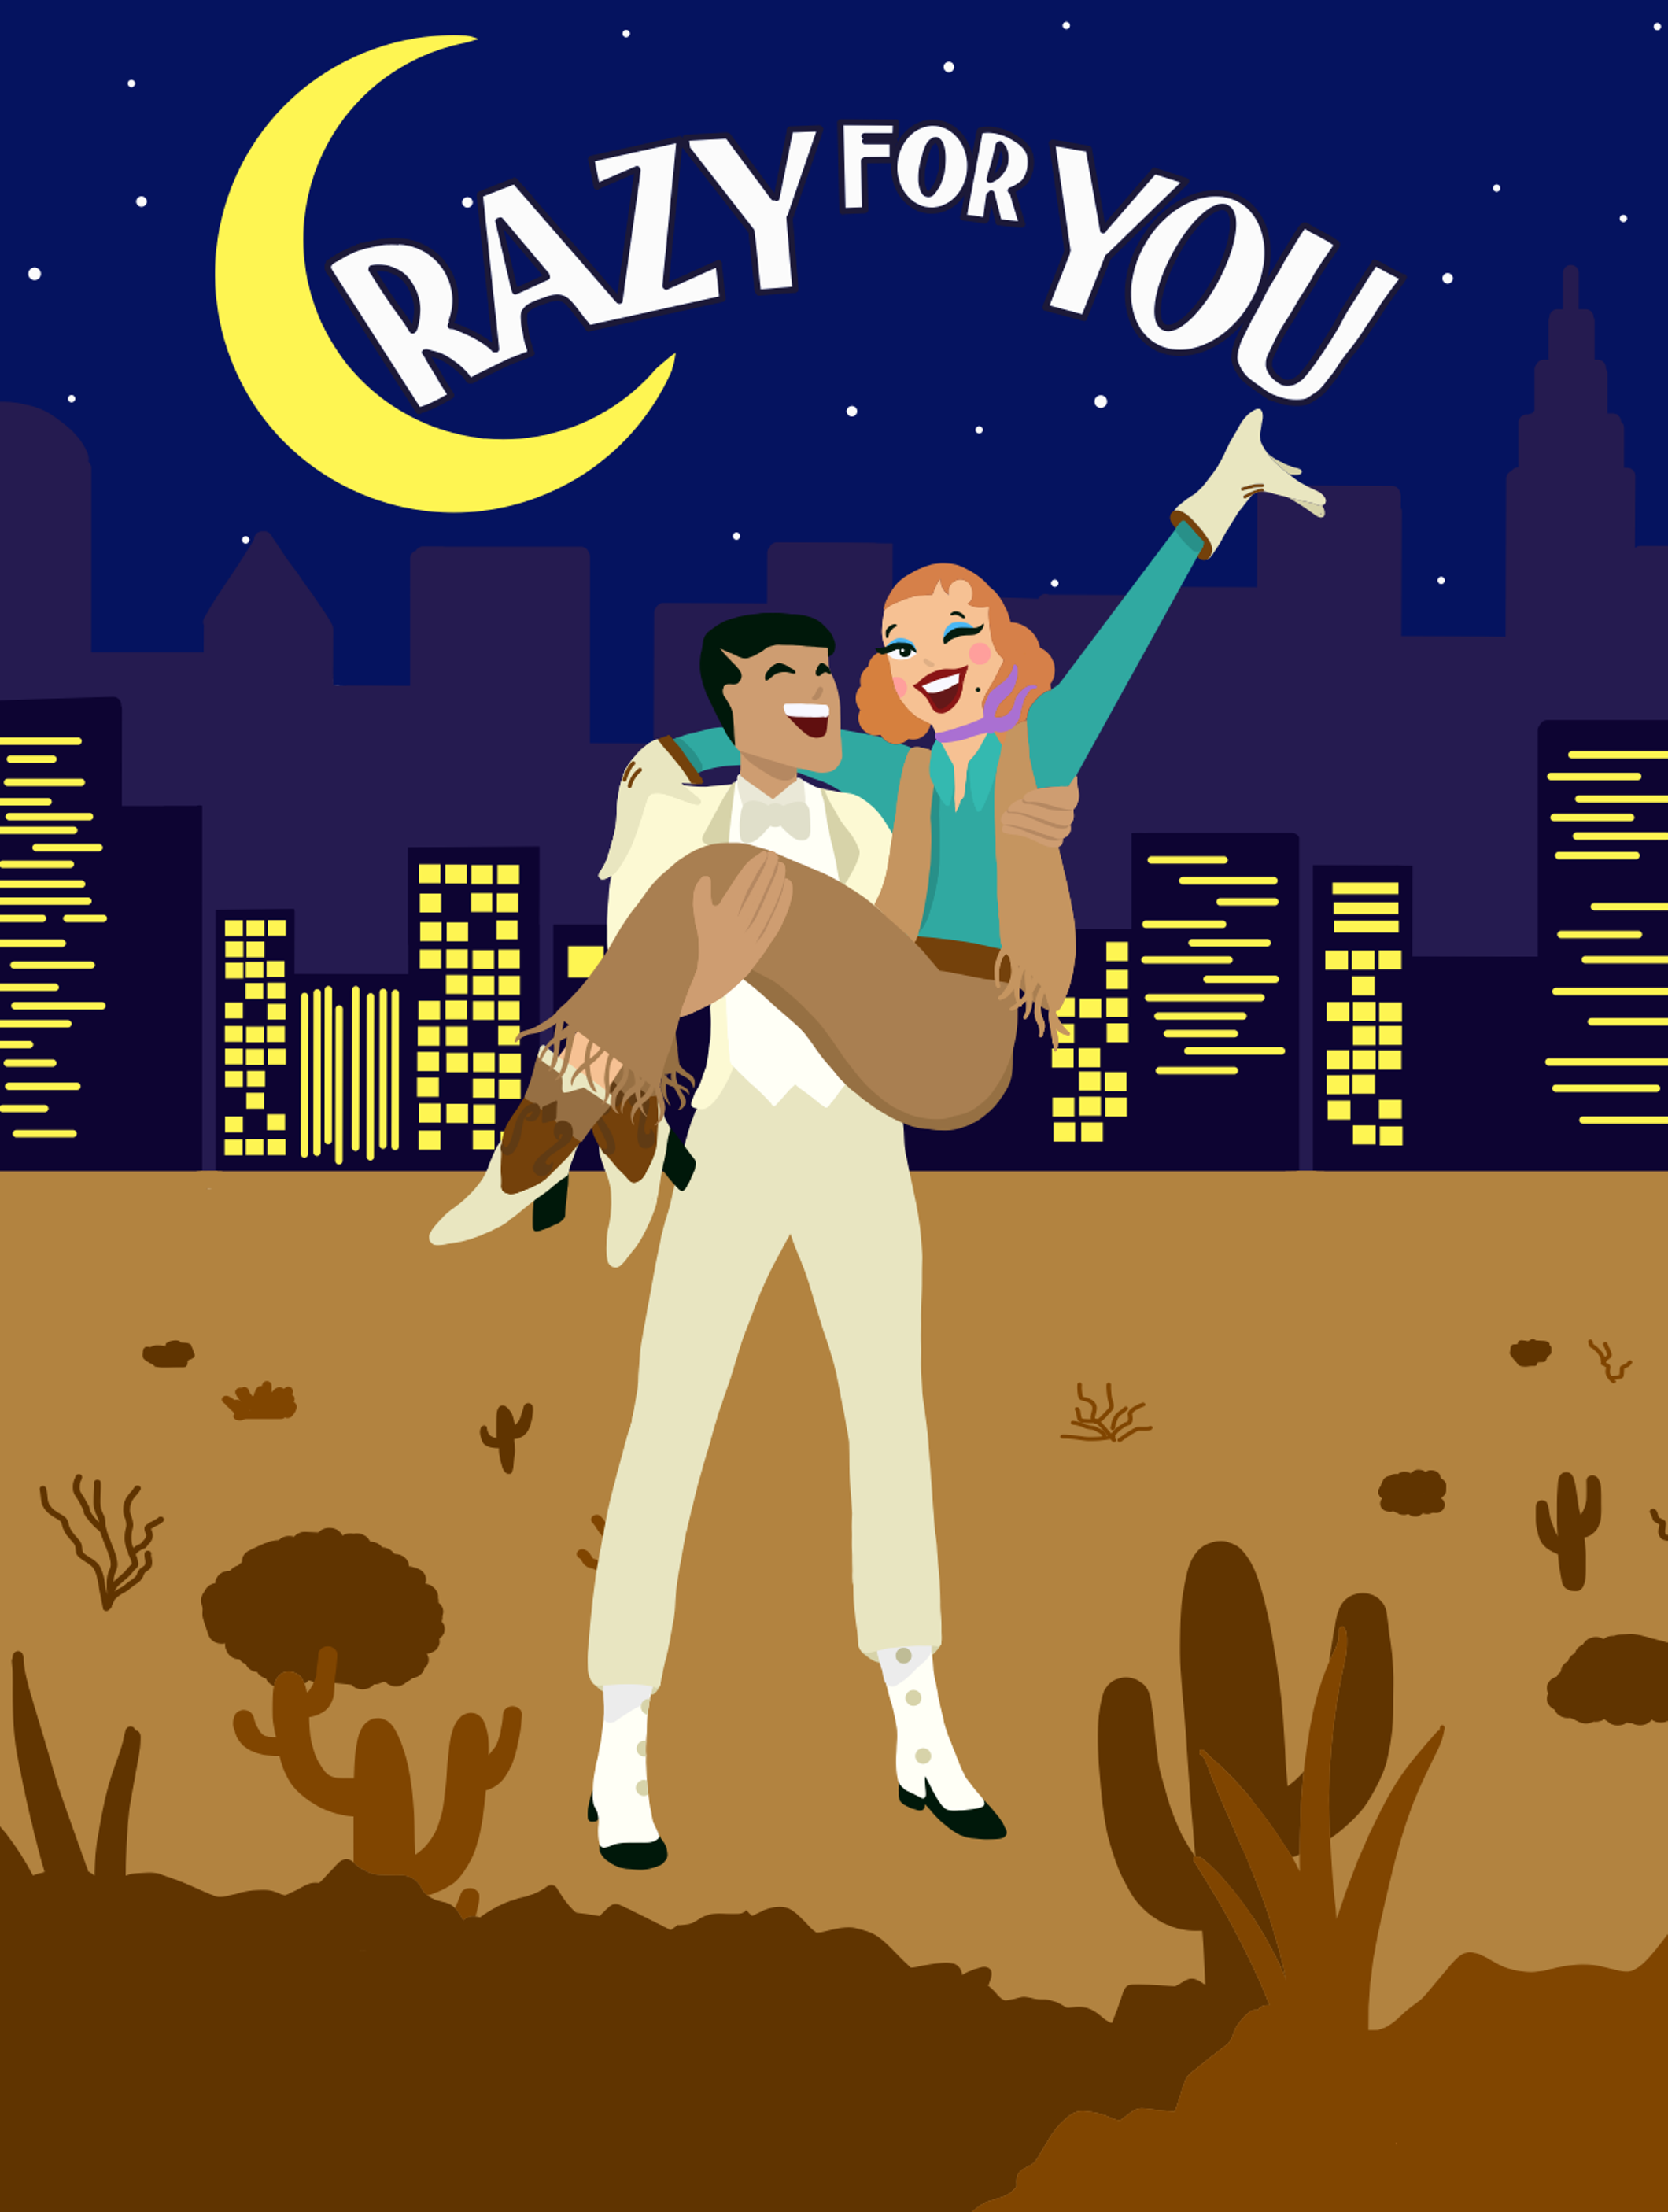 Crazy For You At Taft Theatre Performances December 5 19 To December 8 19 Cover